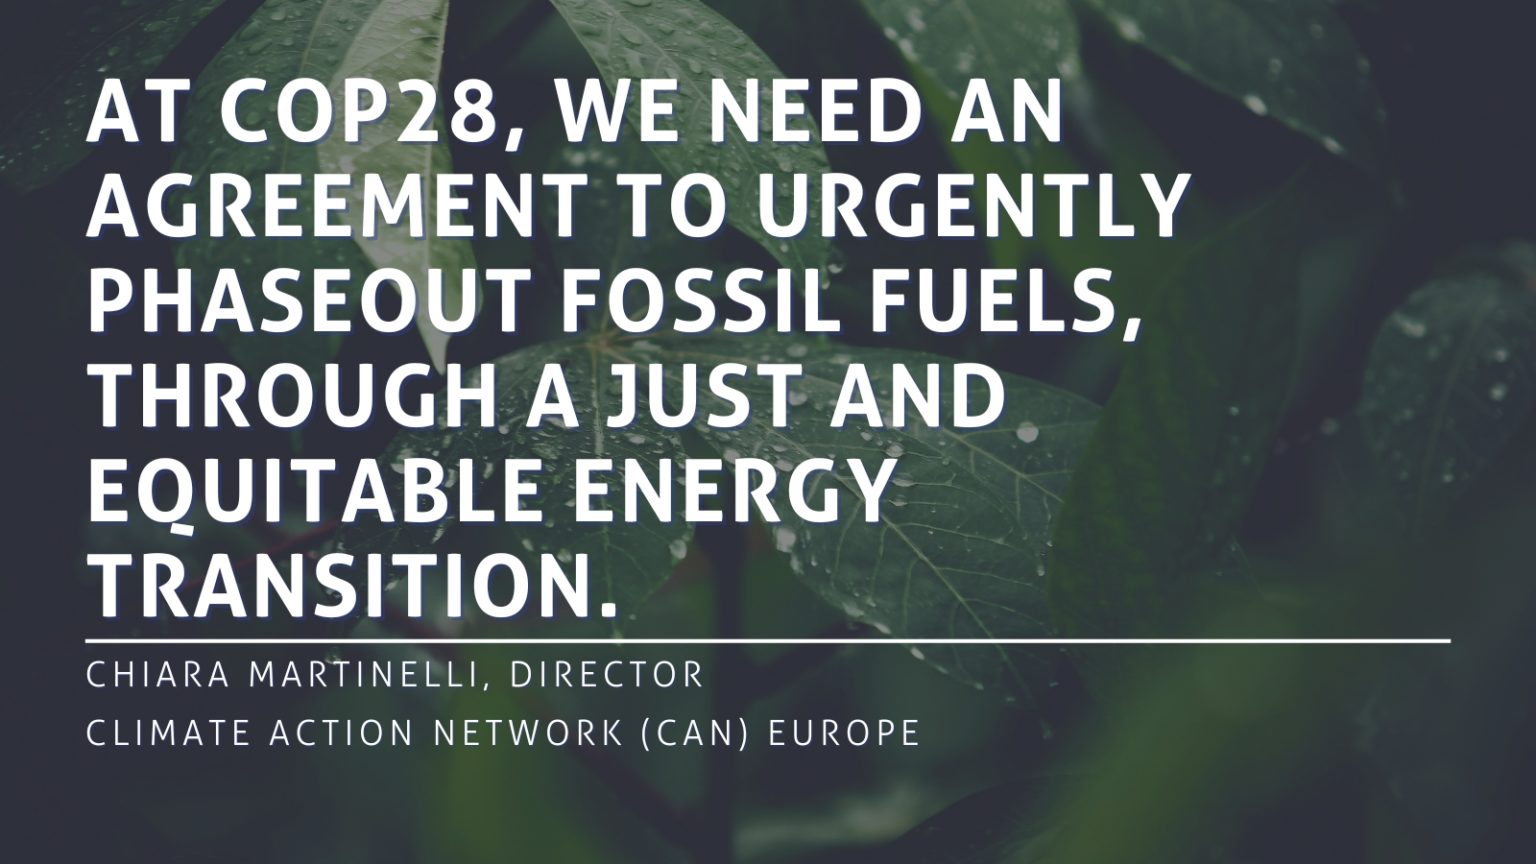 Quote: "At COP28, we need an agreement to urgently phaseout fossil fuels, through a just and equitable energy transition." Chiara Martinelli, Director, Climate Action Network (CAN) Europe